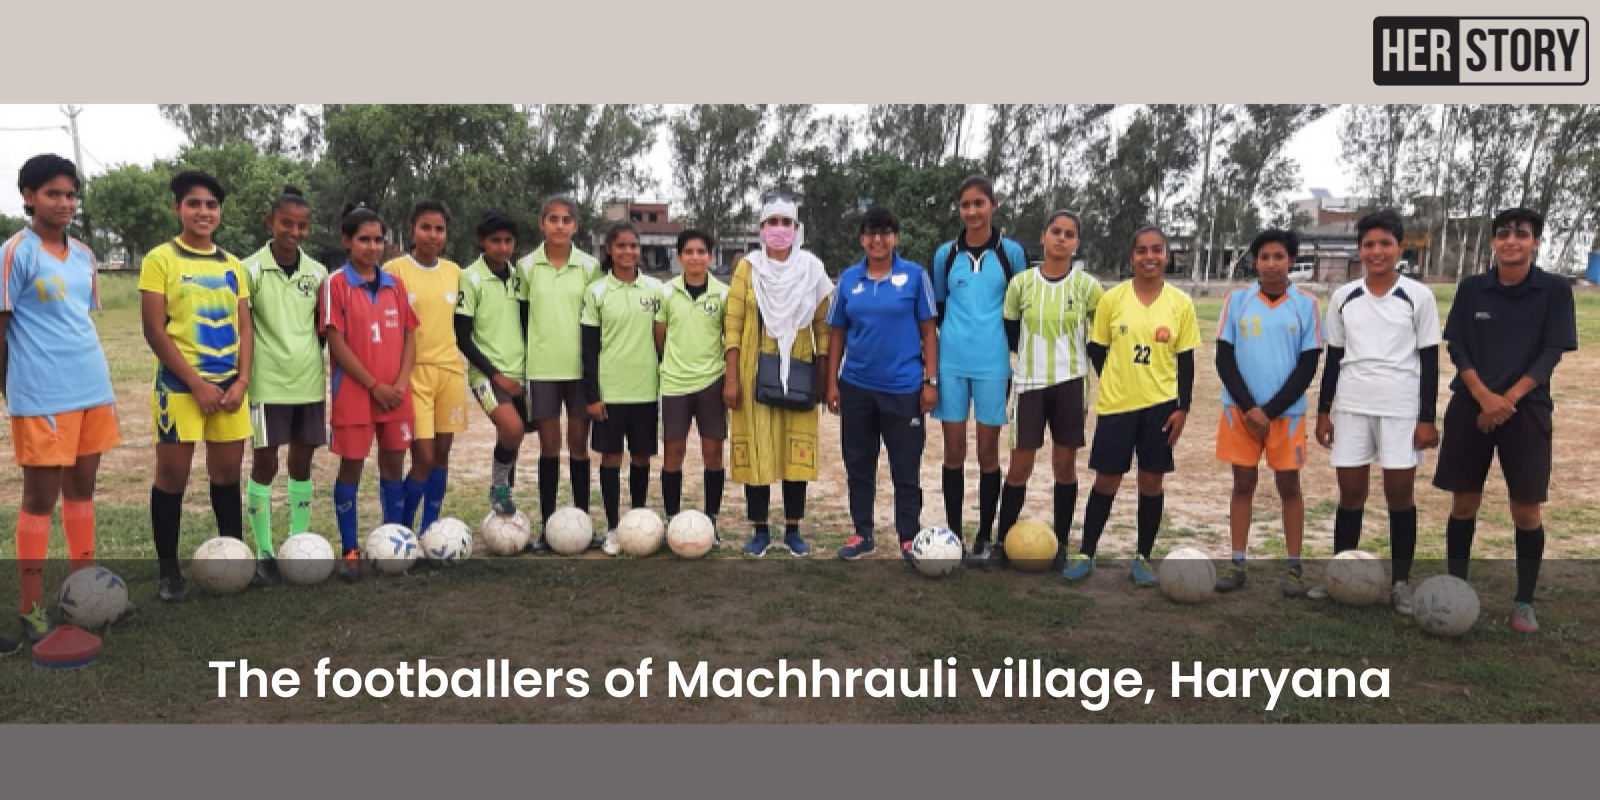 How these girls of Machhrauli village in Haryana are giving wings to their dreams through football

